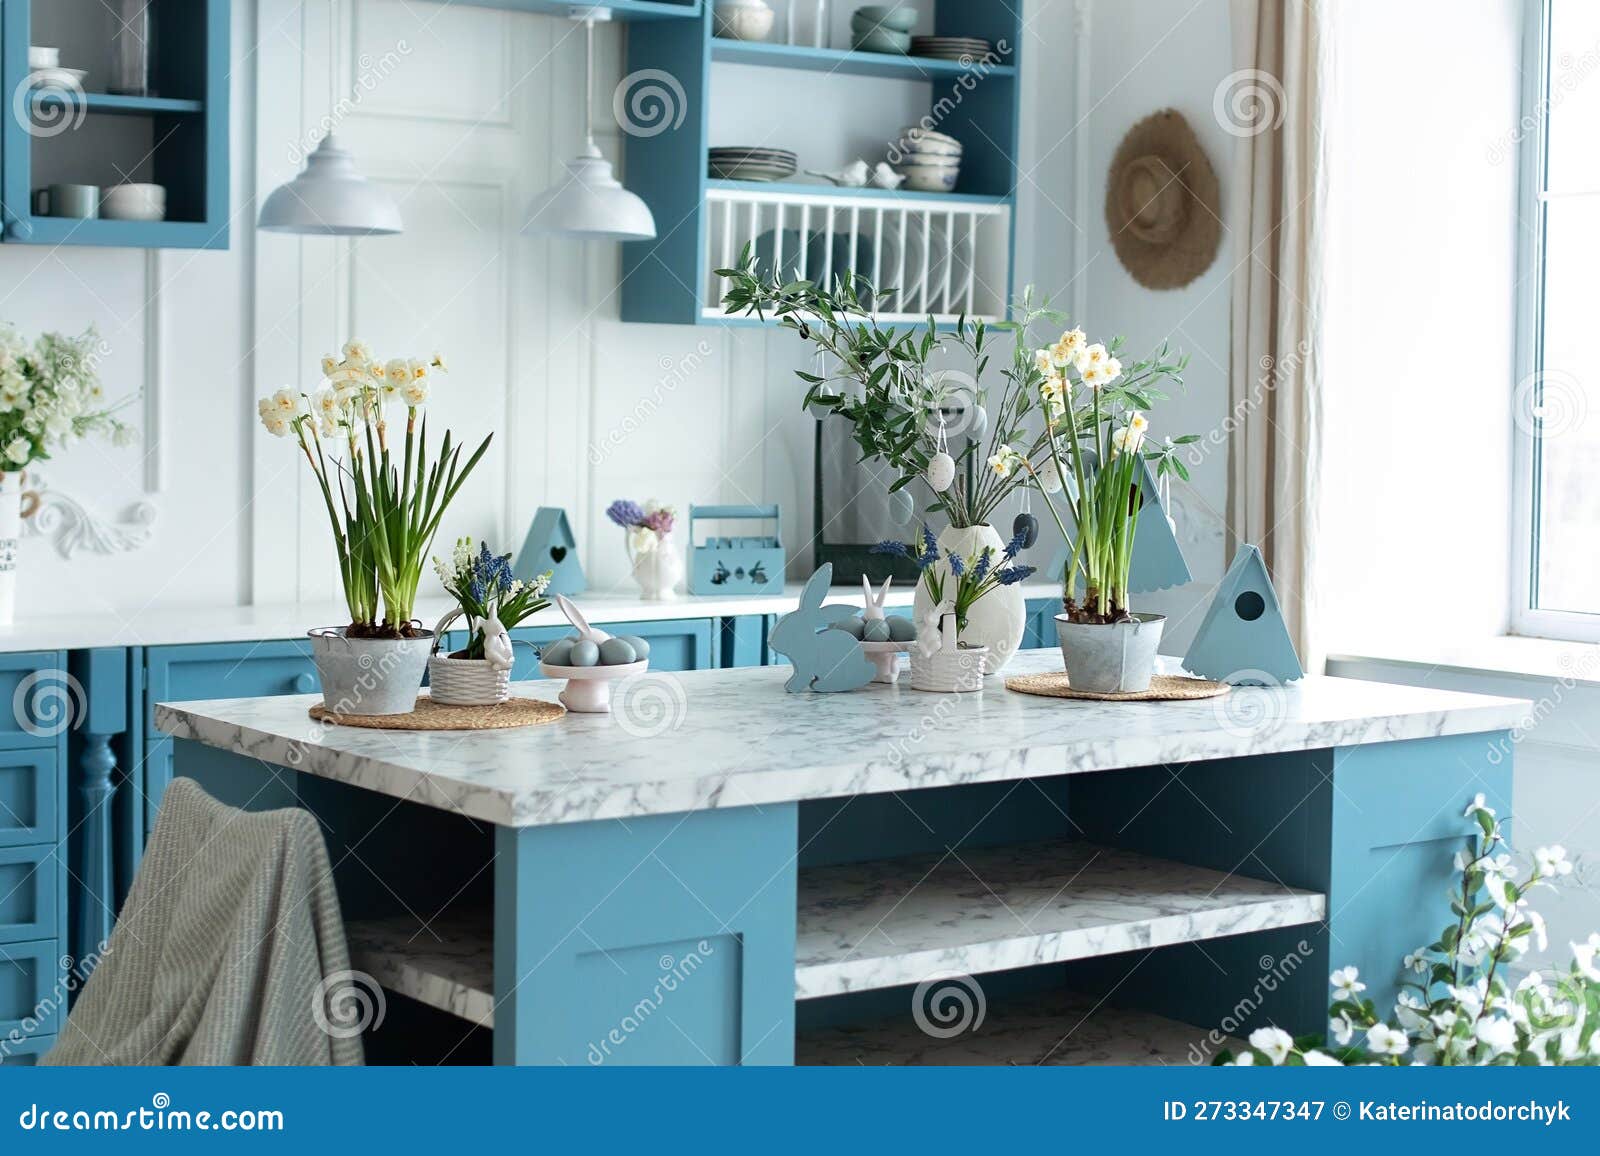 Cozy Easter Home Decor Kitchen Island In Dining Room Utensils And